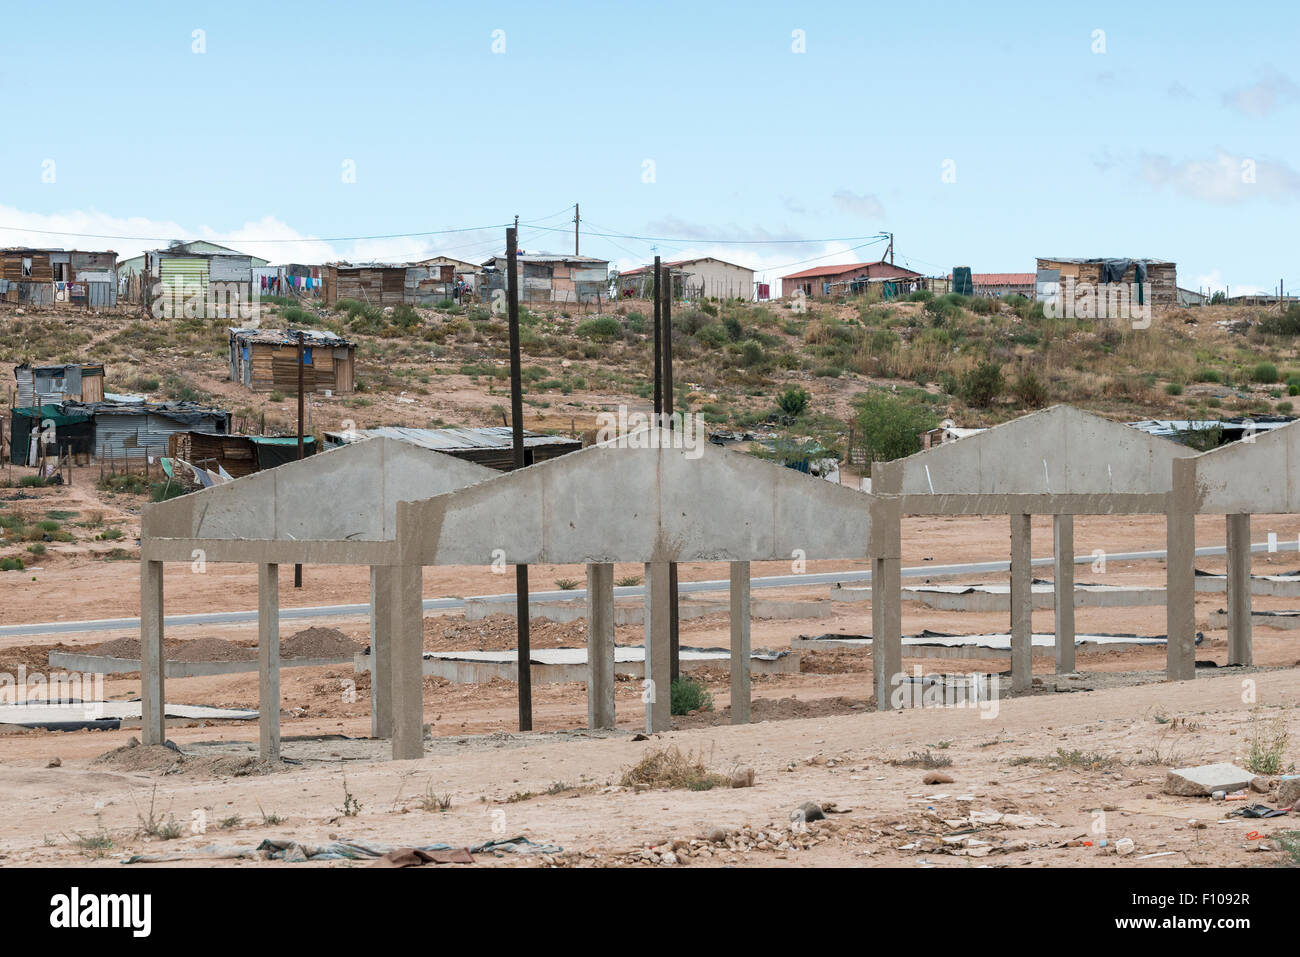 Government supported construction of houses in a township, Oudtshorn, Western Cape, South Africa Stock Photo